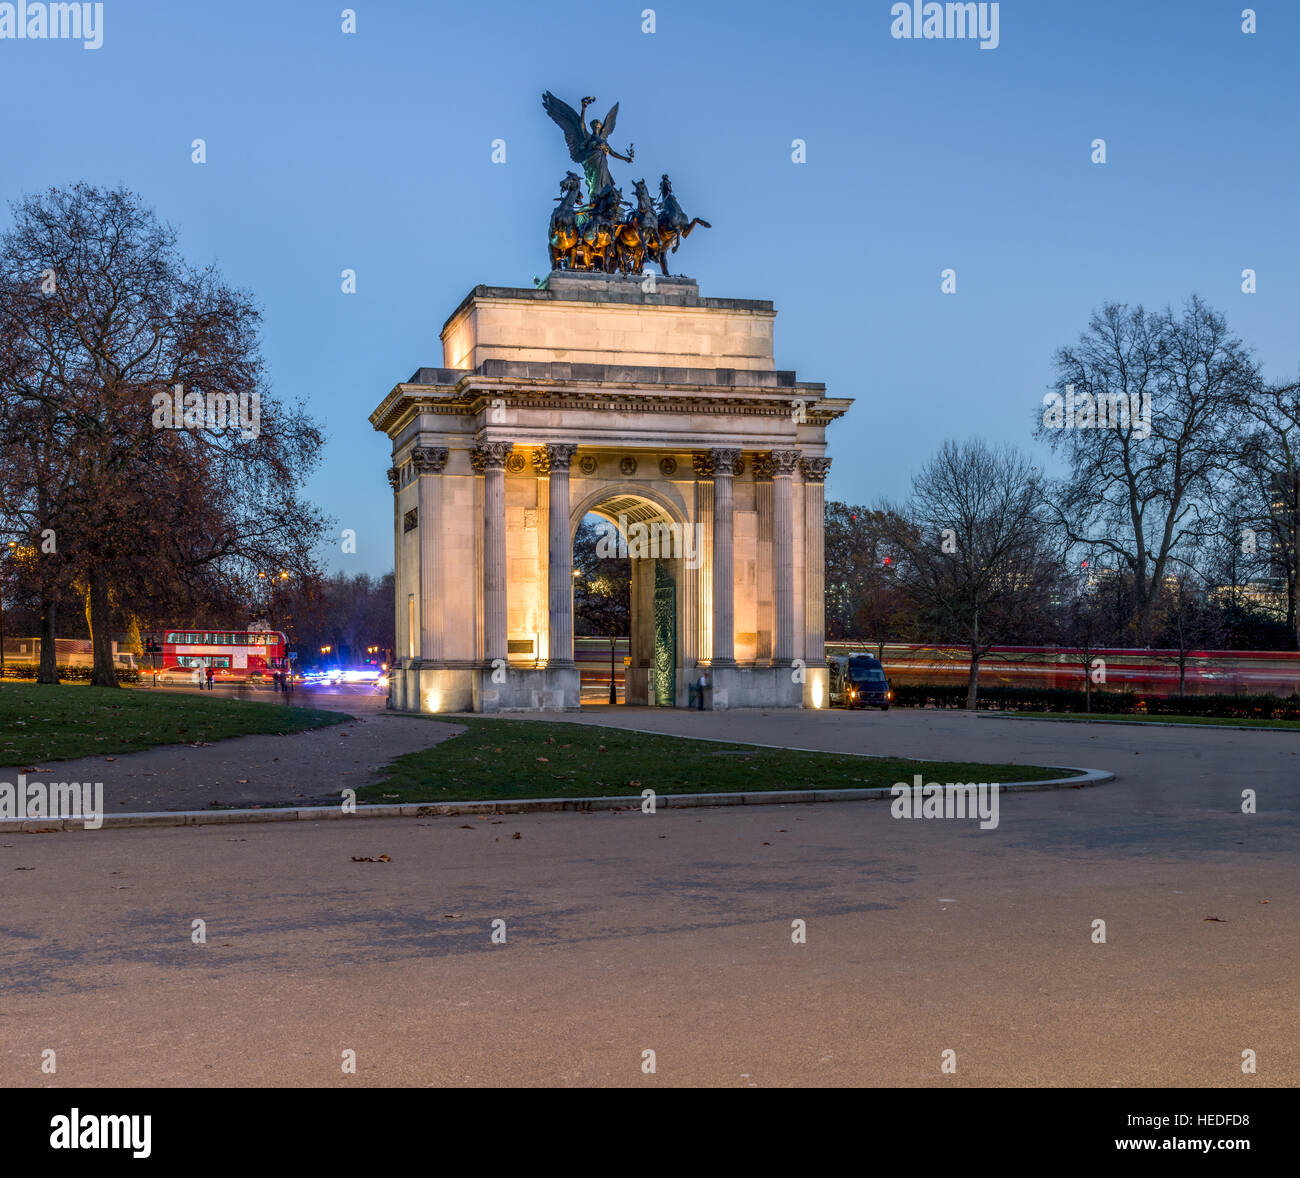 Wellington Arch at constitution hill, London, UK Stock Photo